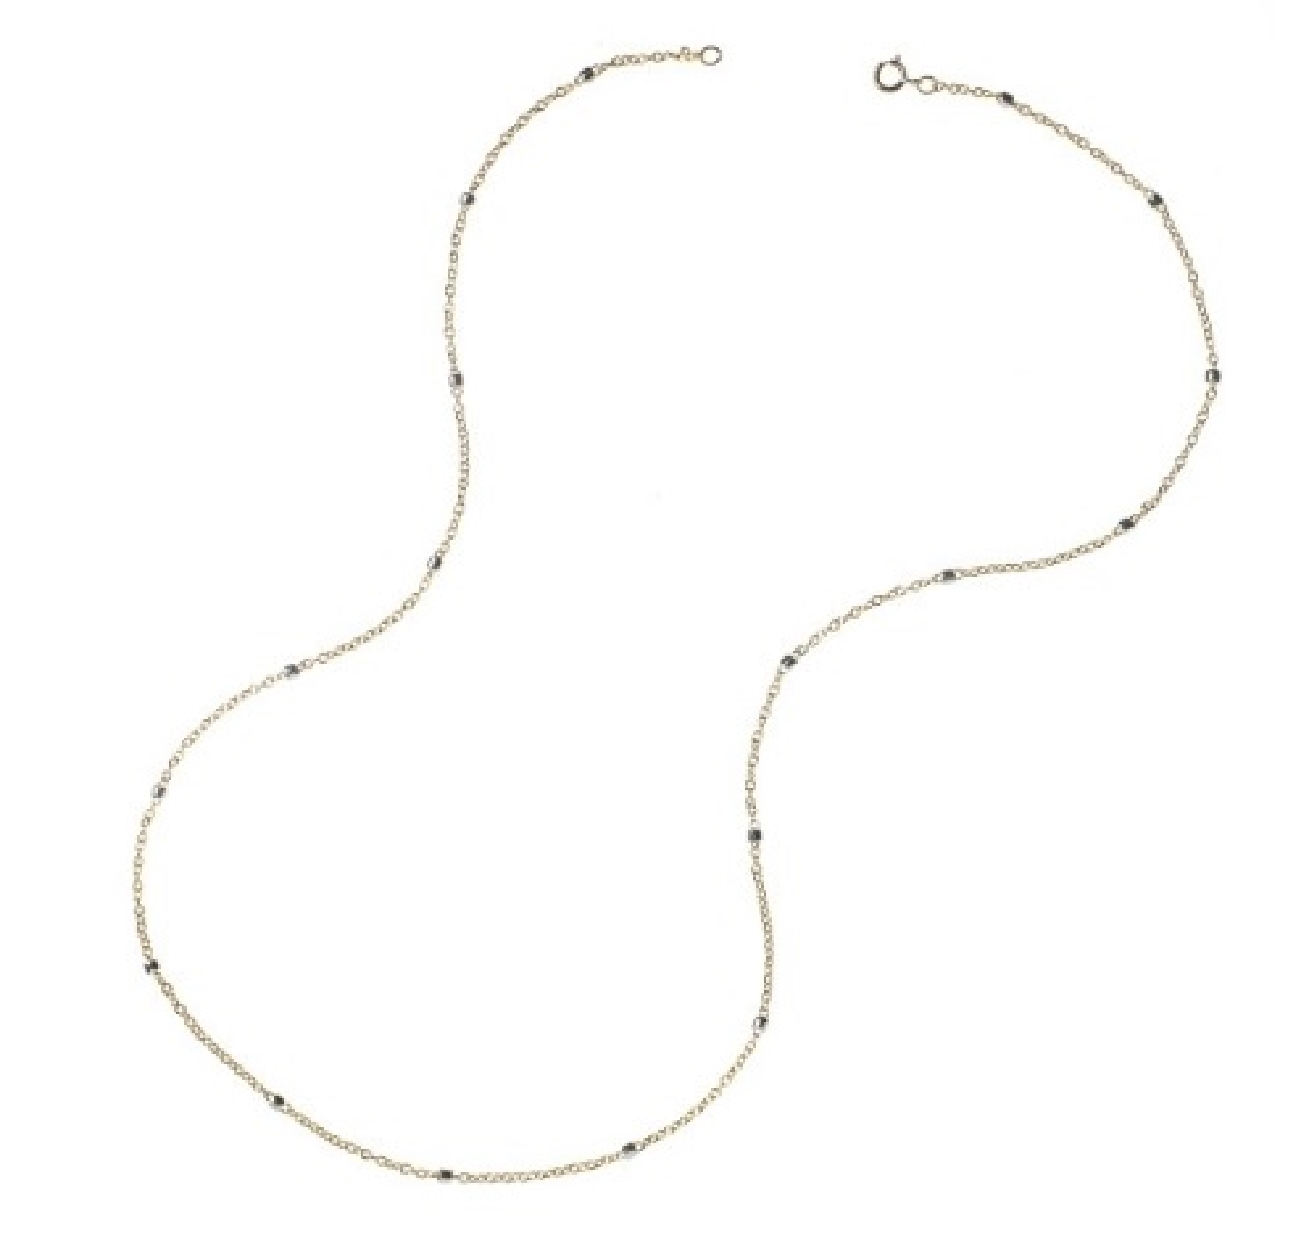 Southern Gates Gold Filled 18 Inch Necklace with Sterling Silver Beads

MSC1231/18